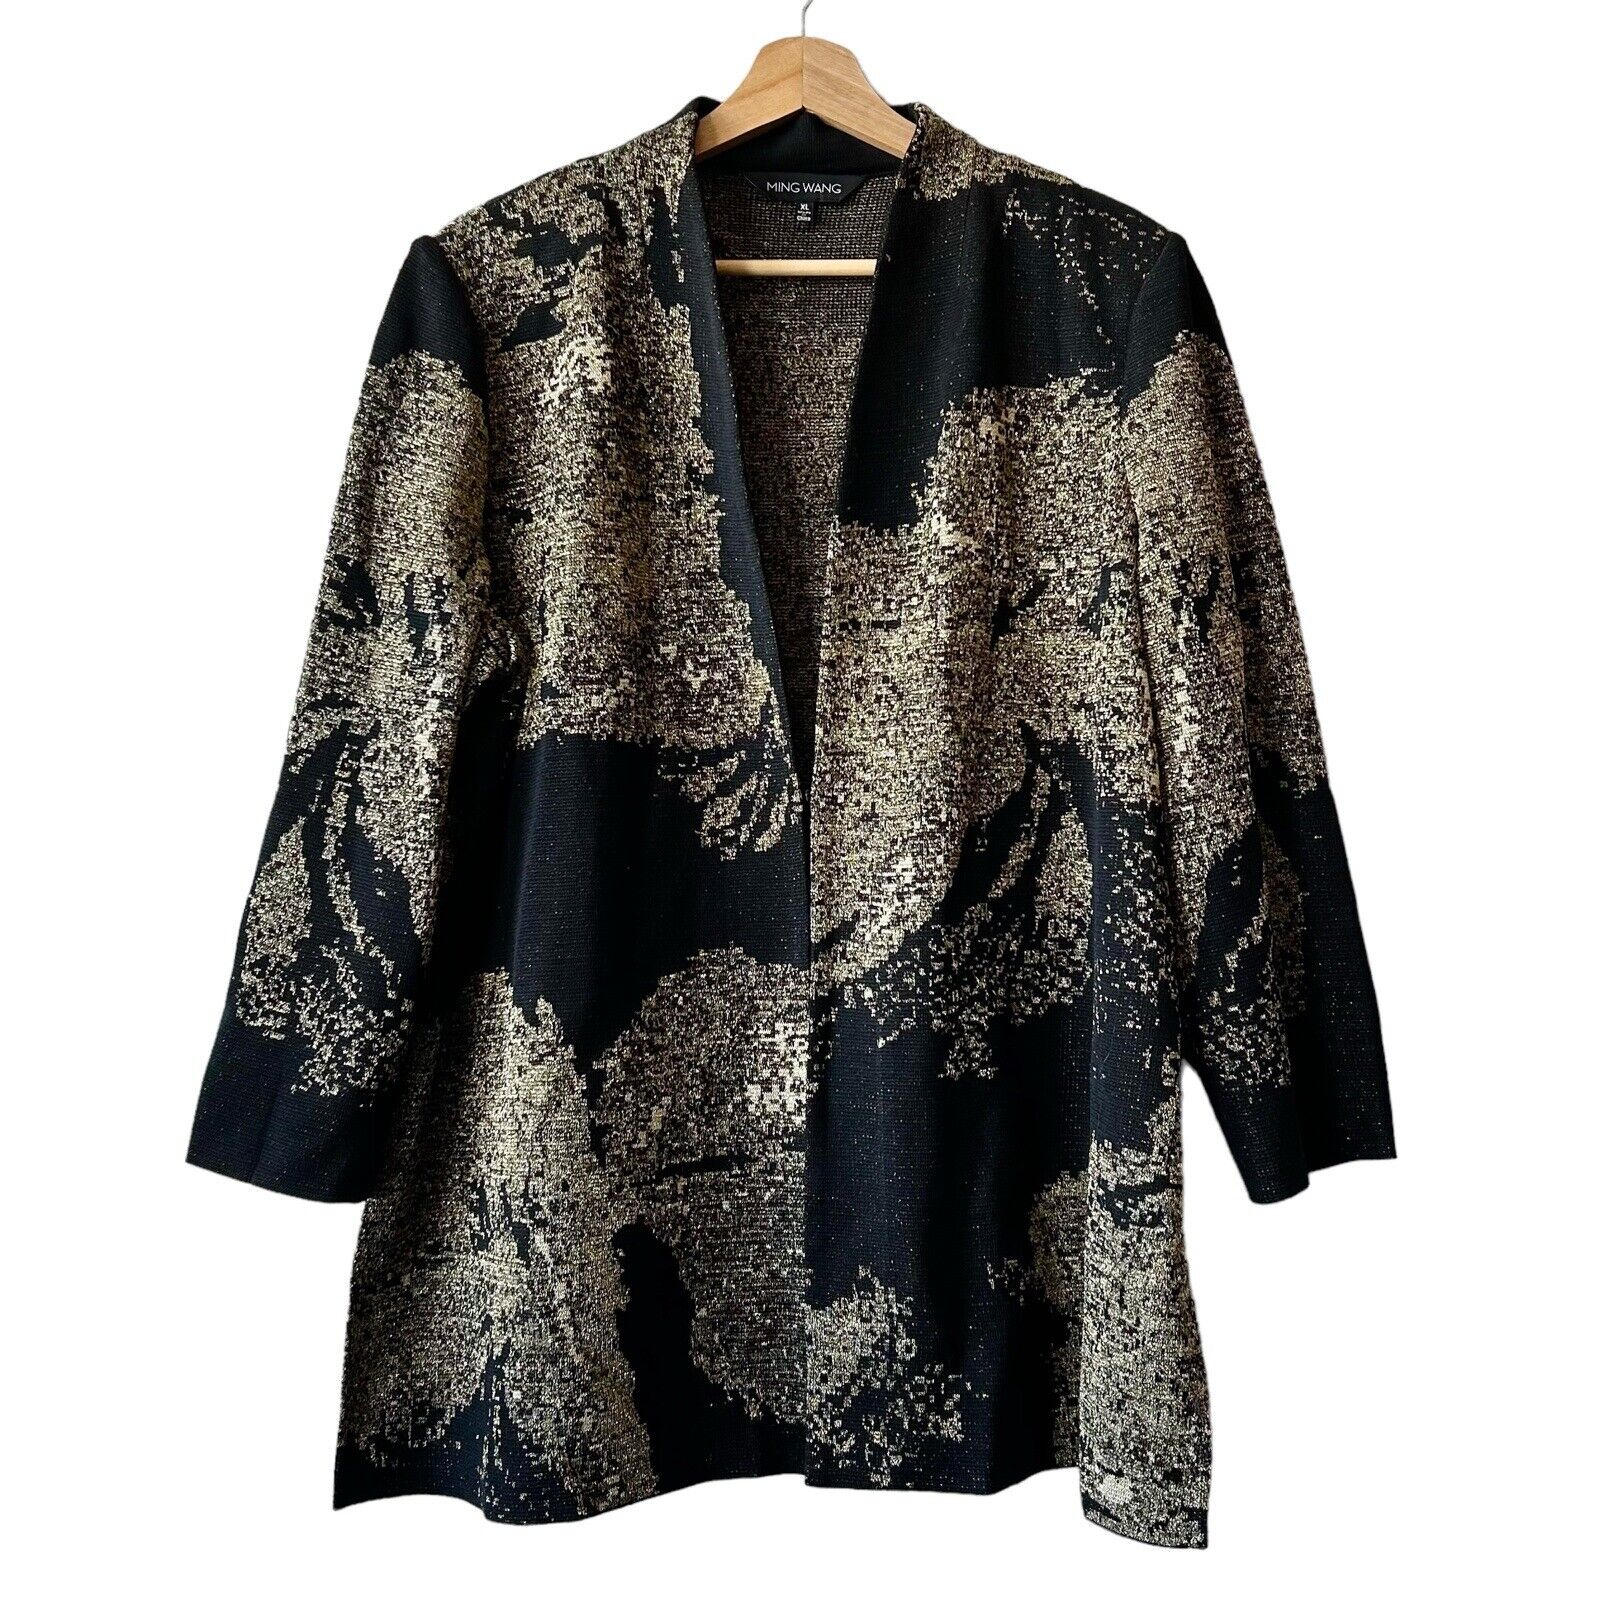 Ming Wang Black Gold Abstract Cardigan Sweater Size XL